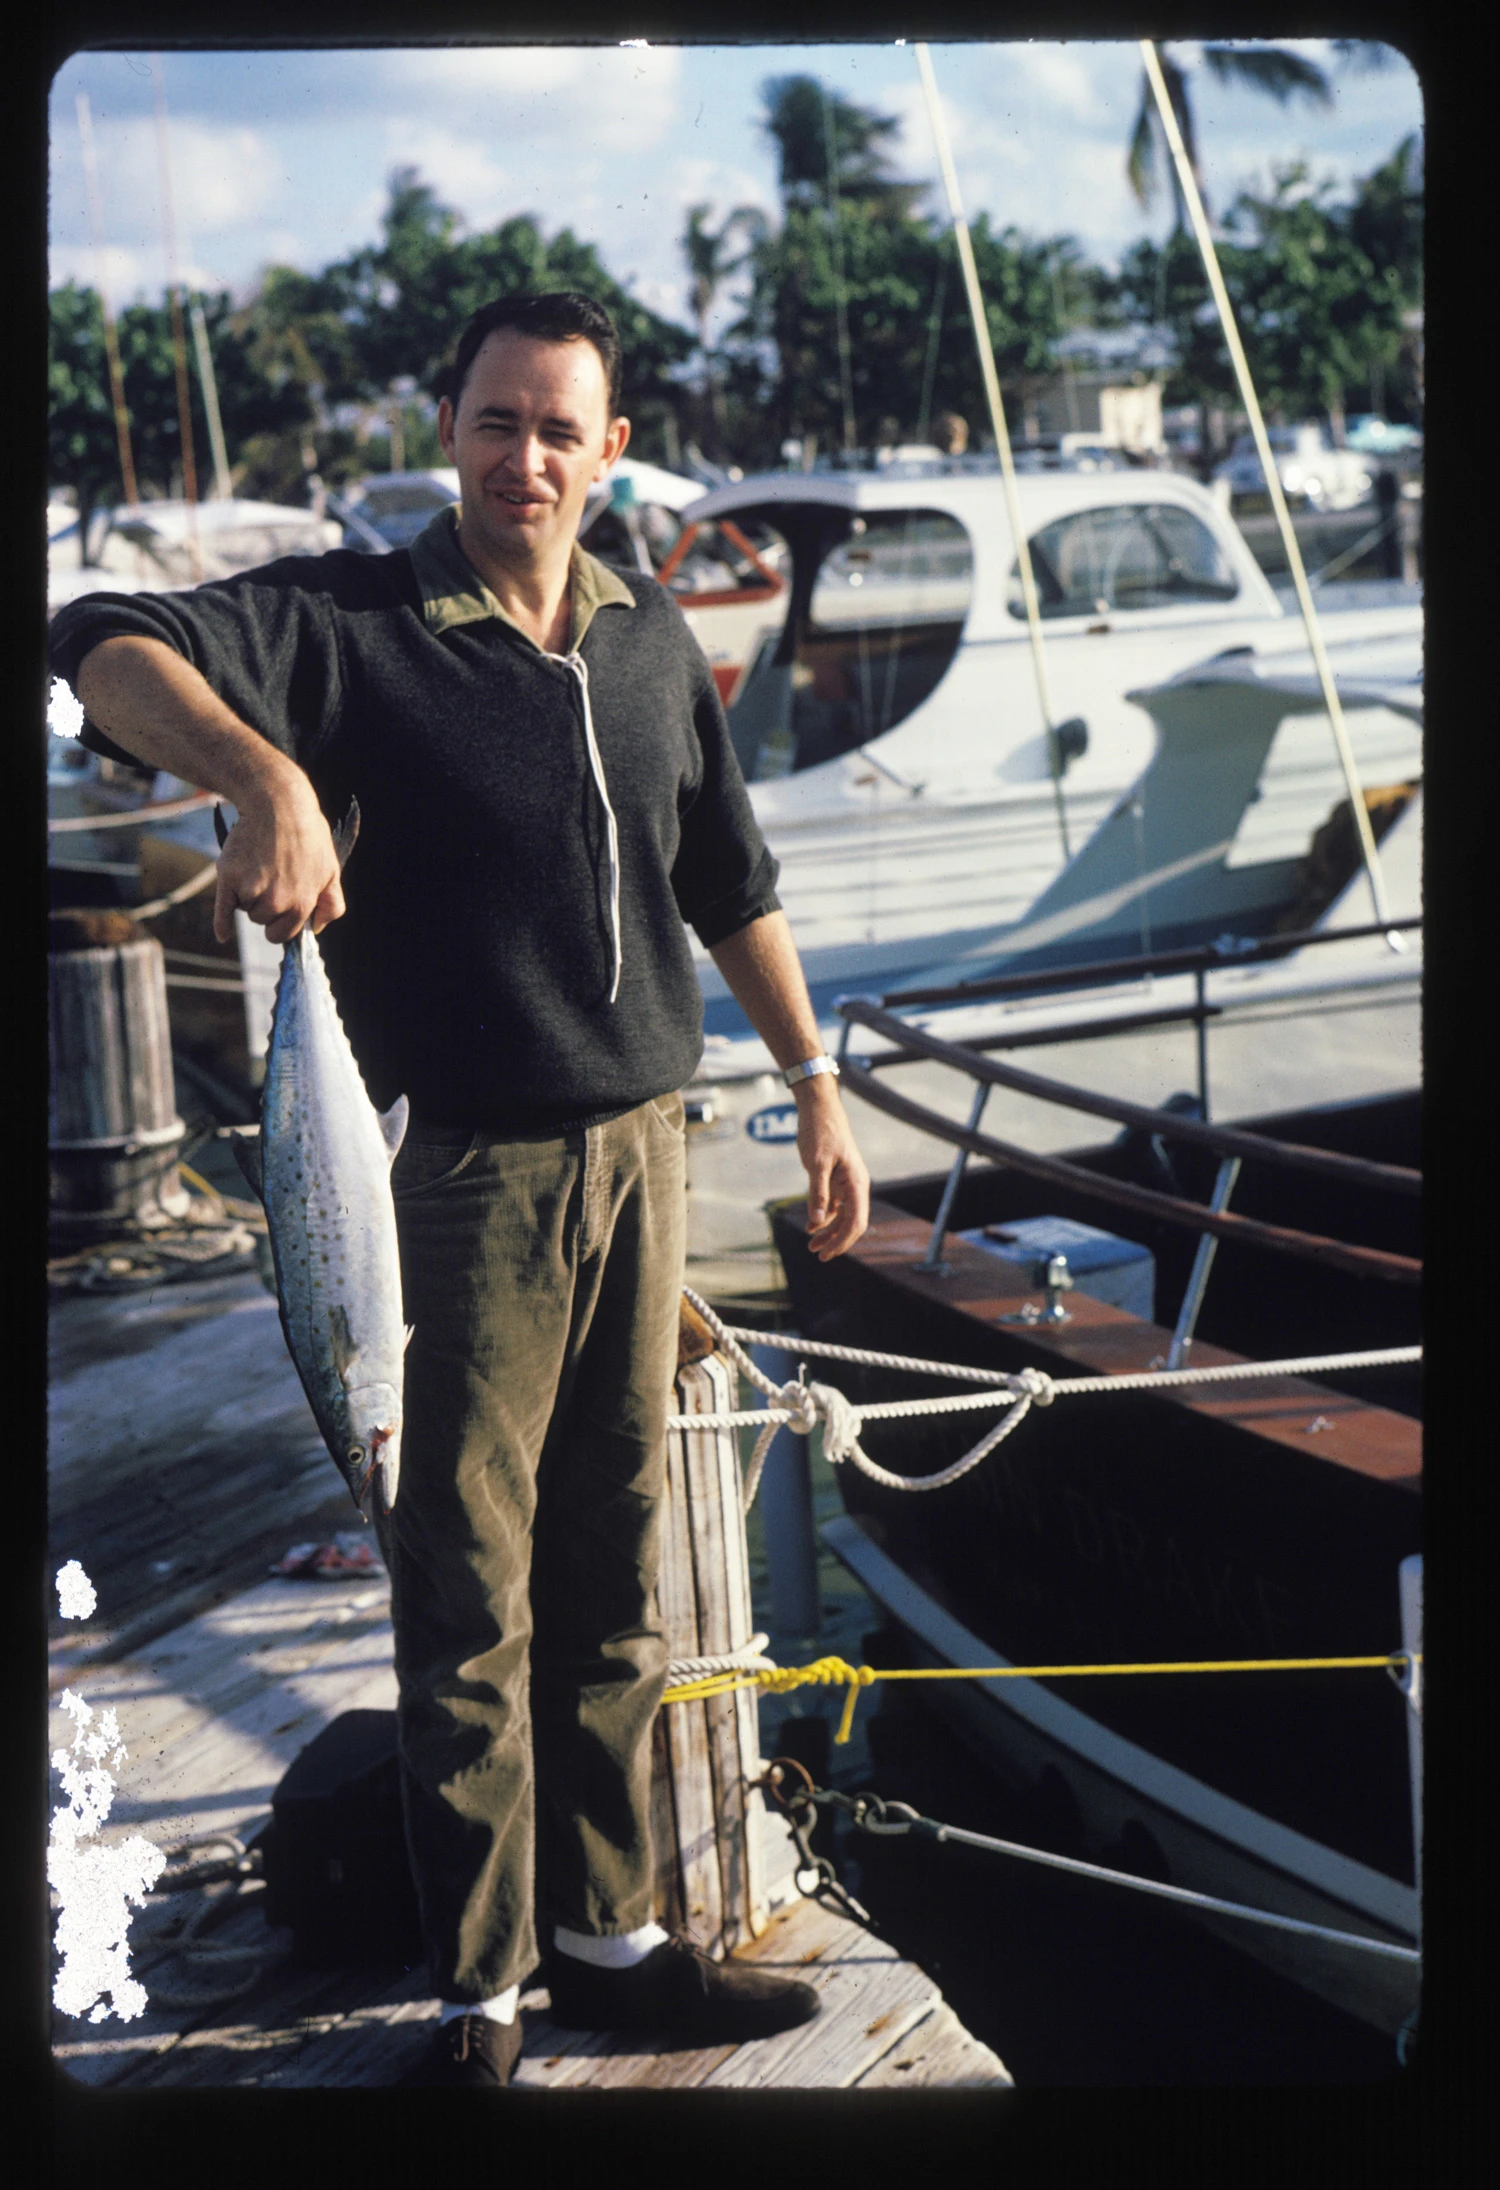 Along with photography, Dr. Stanley loved the outdoors and fishing.